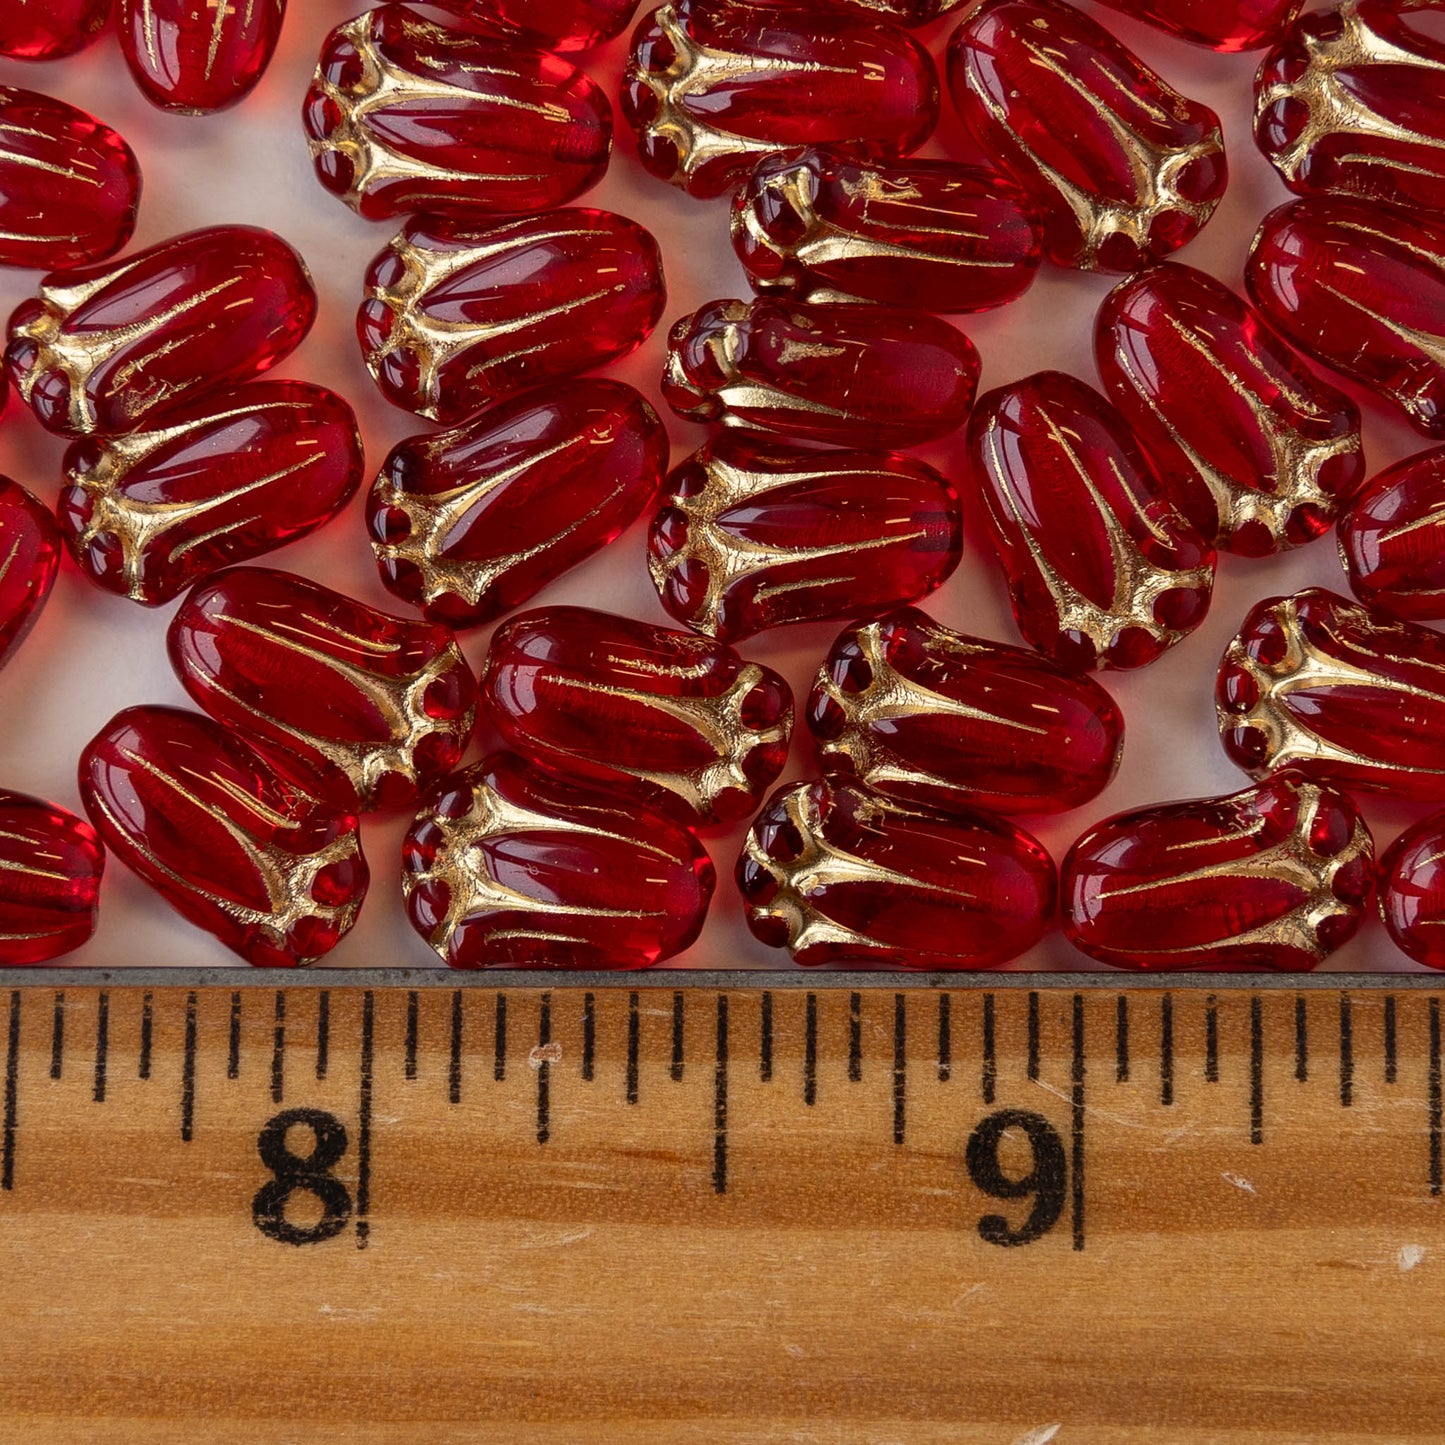 Tulip Flower Beads - Red with Gold Wash - 20 beads